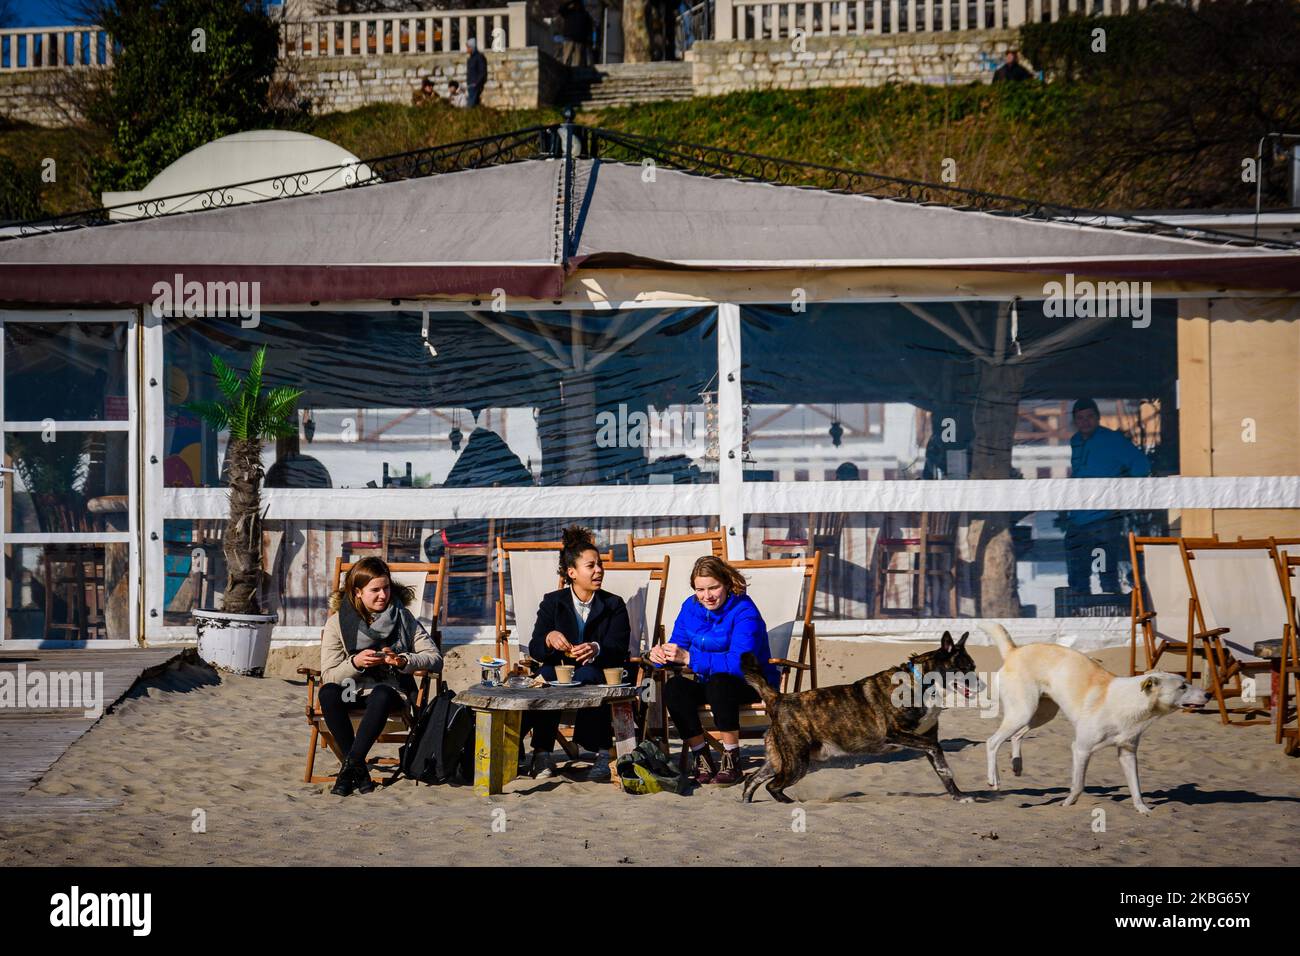 Bulgaria Winter High Temperature Record Broken Bulgarians enjoy themselves on a sunny winter day at the Varna beach, some 450 km to the East of the Bulgarian capital Sofia, on Feb. 3, 2020. Temperatures of the are expected to soar at 20 degrees in Celsius (68 in Fahrenheit). A more then 50 years' high temperature record was broken on Feb 2, as the temperature reached 19 degrees in Celsius (some 66 in Fahrenheit). The weather is supposed to be unusually warm for the next 3-4 days. (Photo by Petko Momchilov/Impact Press GroupNurPhoto) Stock Photo